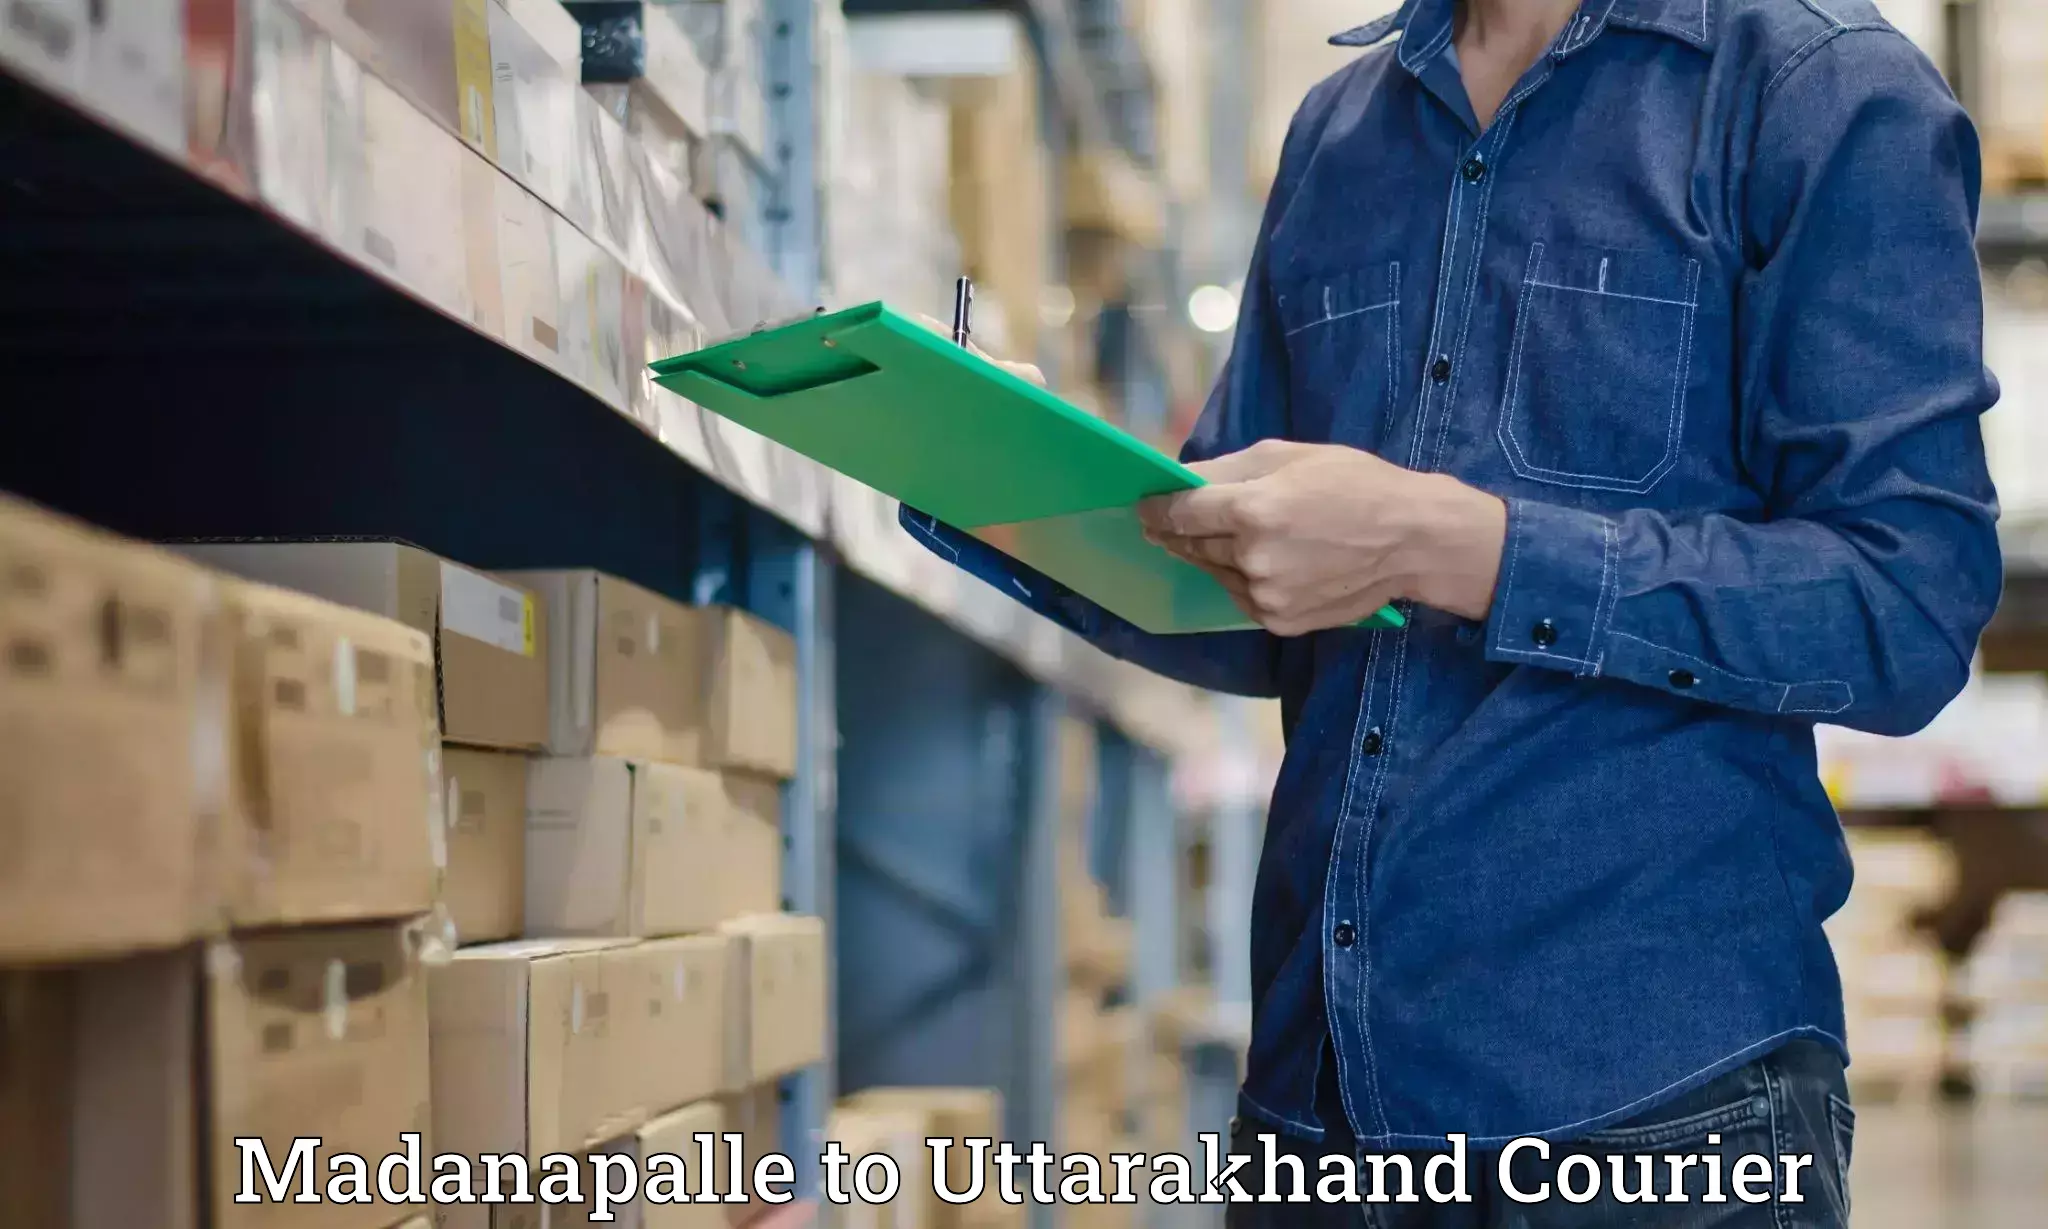 Automated parcel services Madanapalle to Someshwar